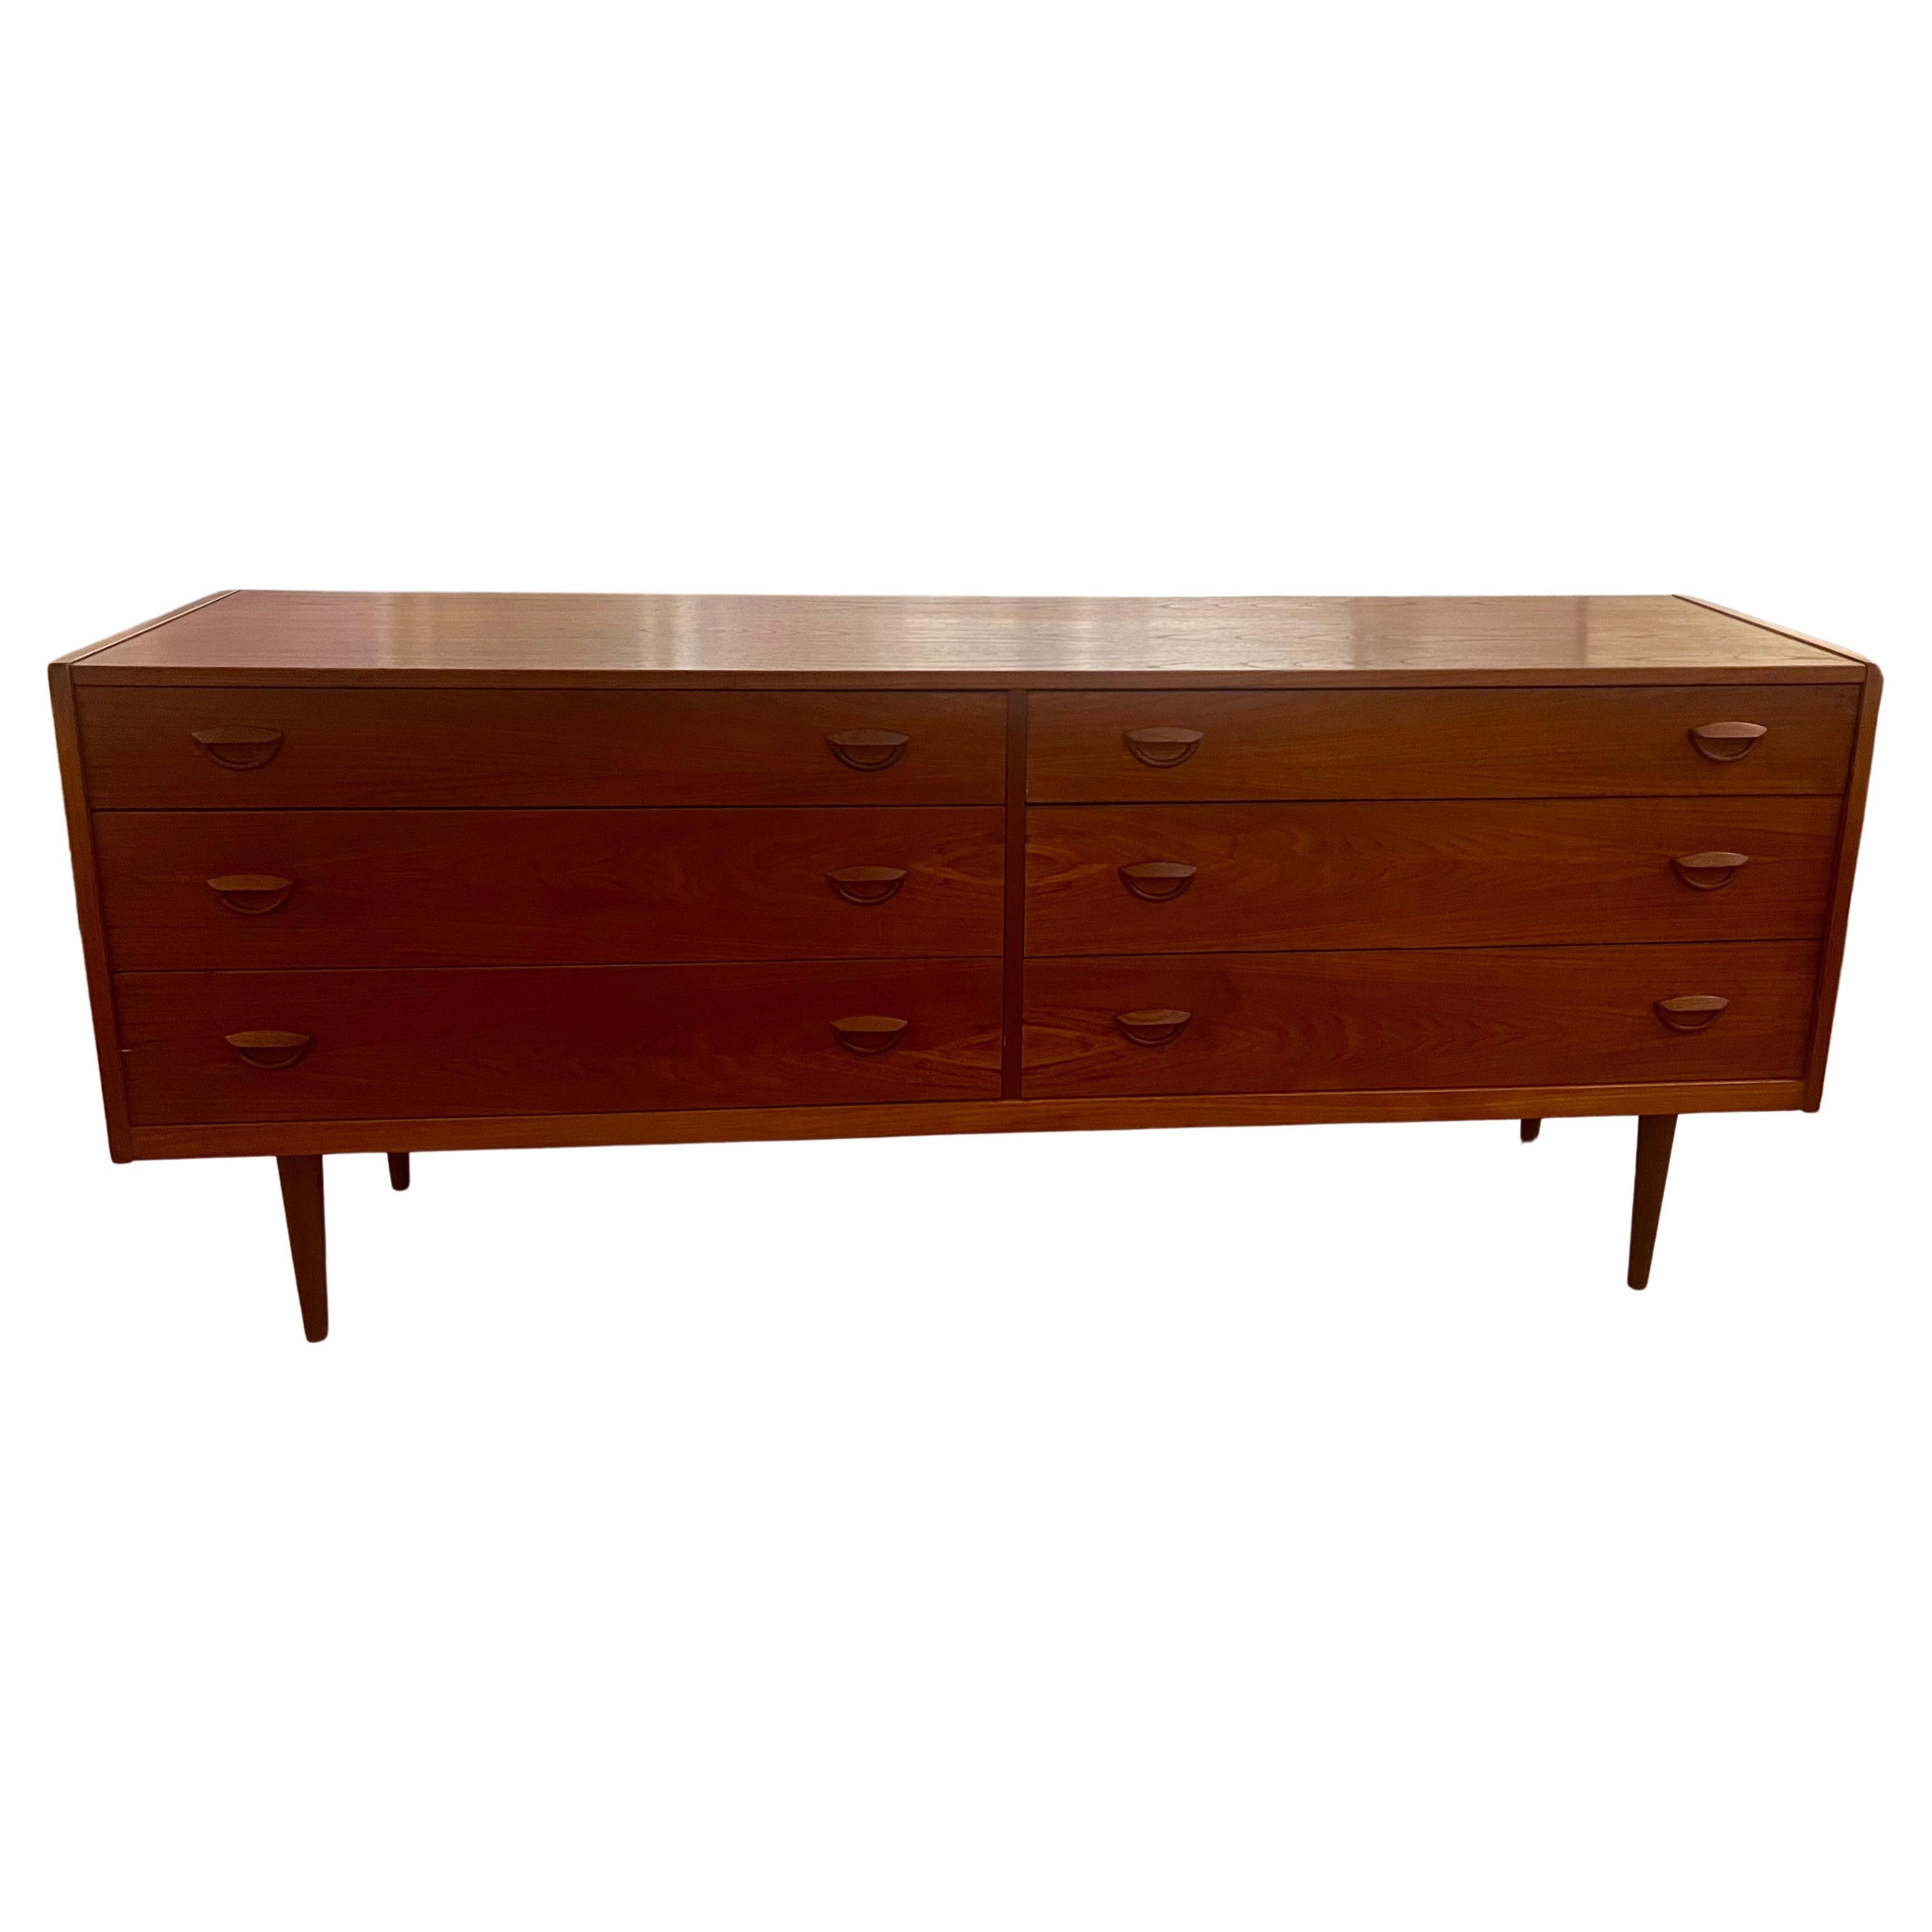 Beautiful elegant 6 drawer dresser attributed to Kai Kristiansen , we have cleaned and oiled the piece looks great condition and natural patina , gorgeous handles nice dovetail drawers , a great addition to any Mid Century , Danish Moderrn Home